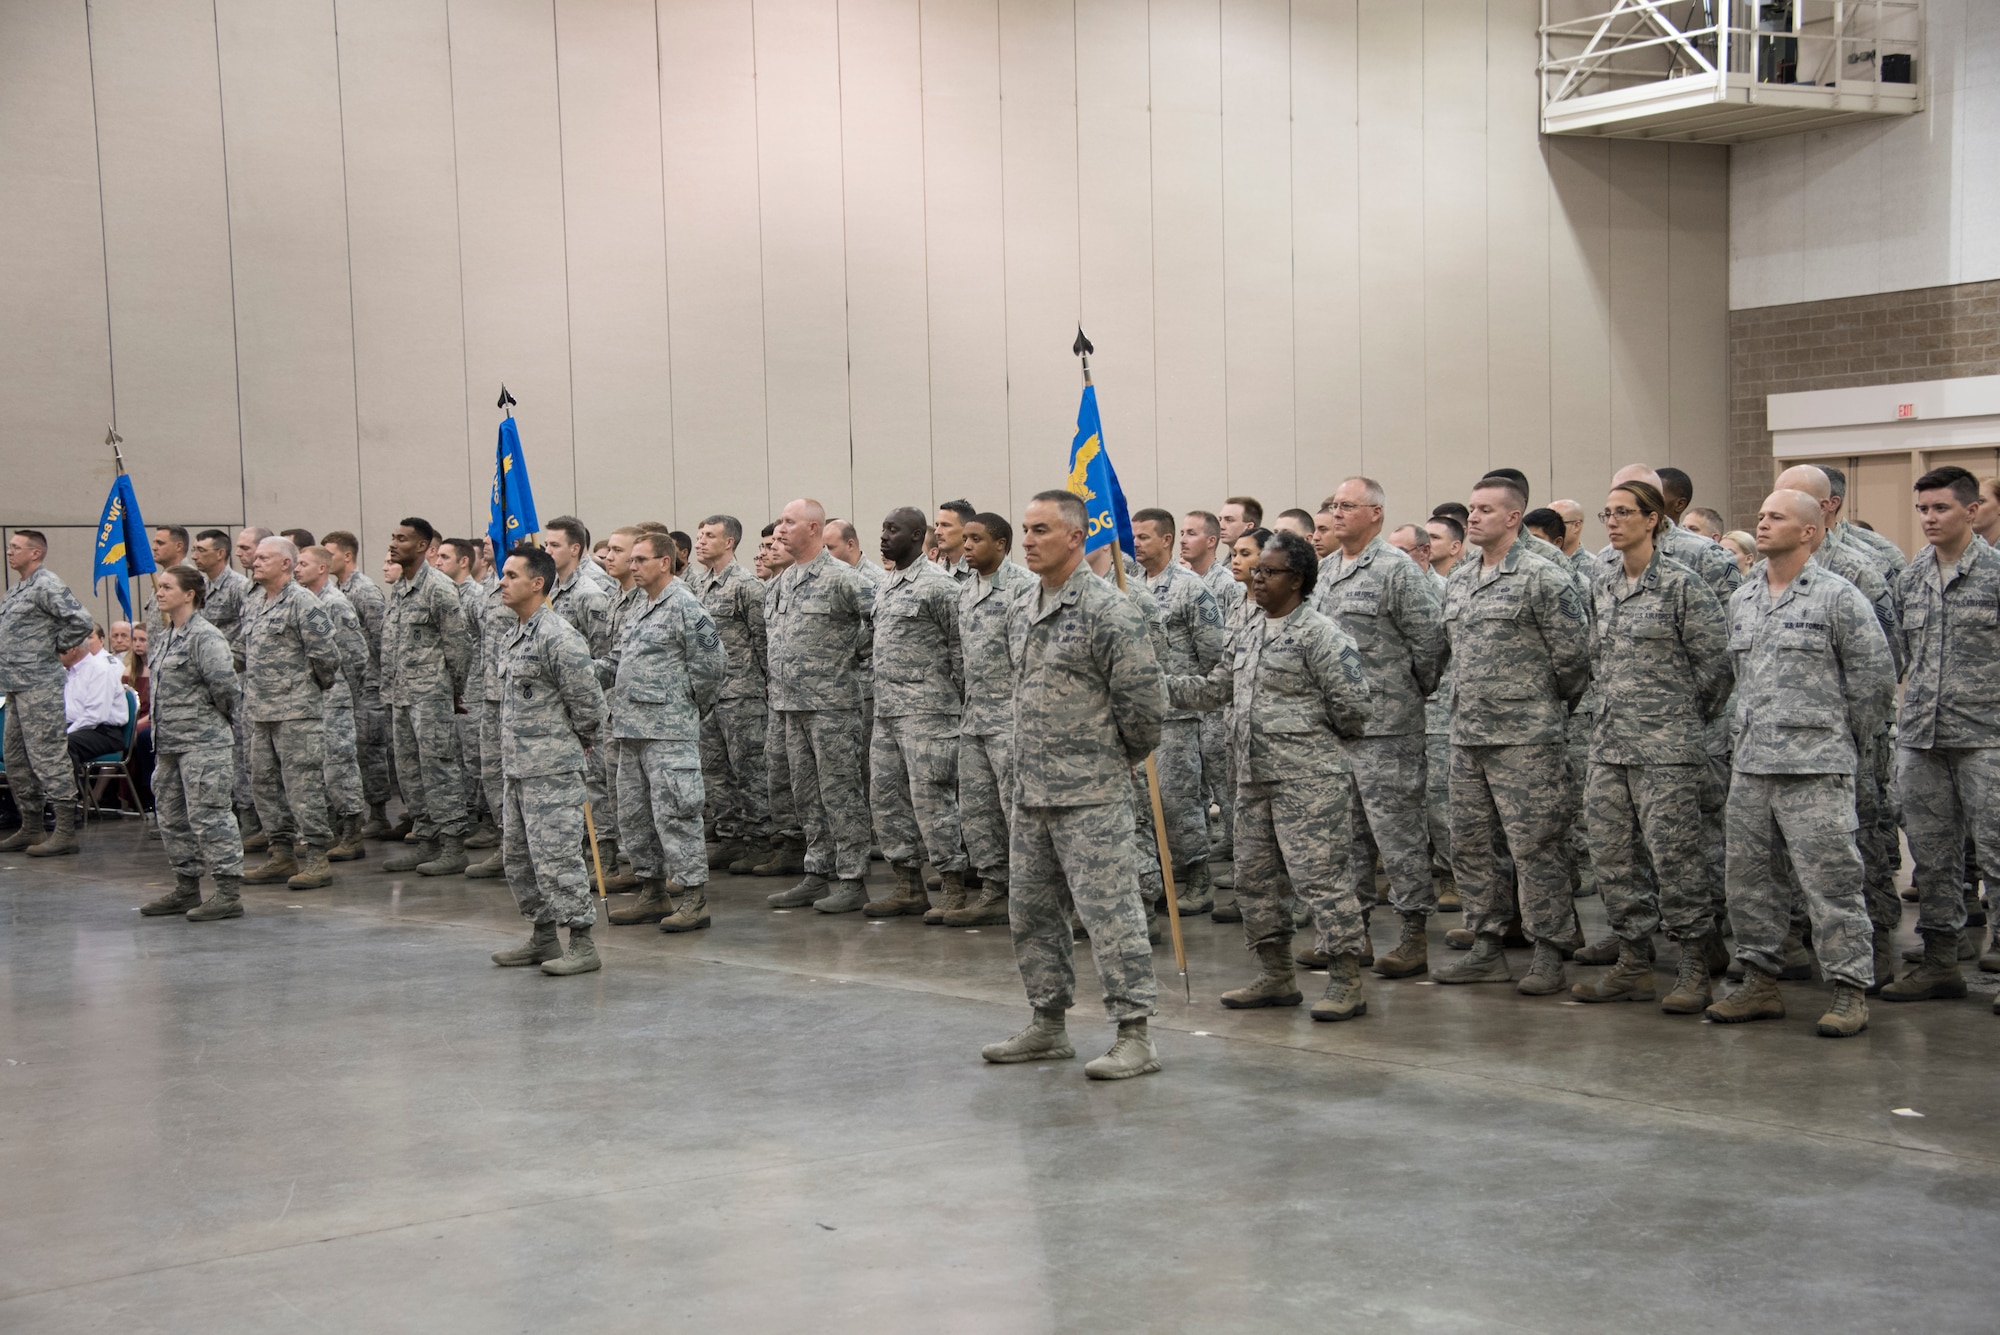 Members of the 188th Wing stand in formation during a change of command ceremony at Fort Smith, Ark., Aug. 11, 2019. The change of command is a military tradition signified with the passing of the unit's guidon flag from one commander to the next. (U.S. Air National Guard photo by Tech. Sgt. John E. Hillier)